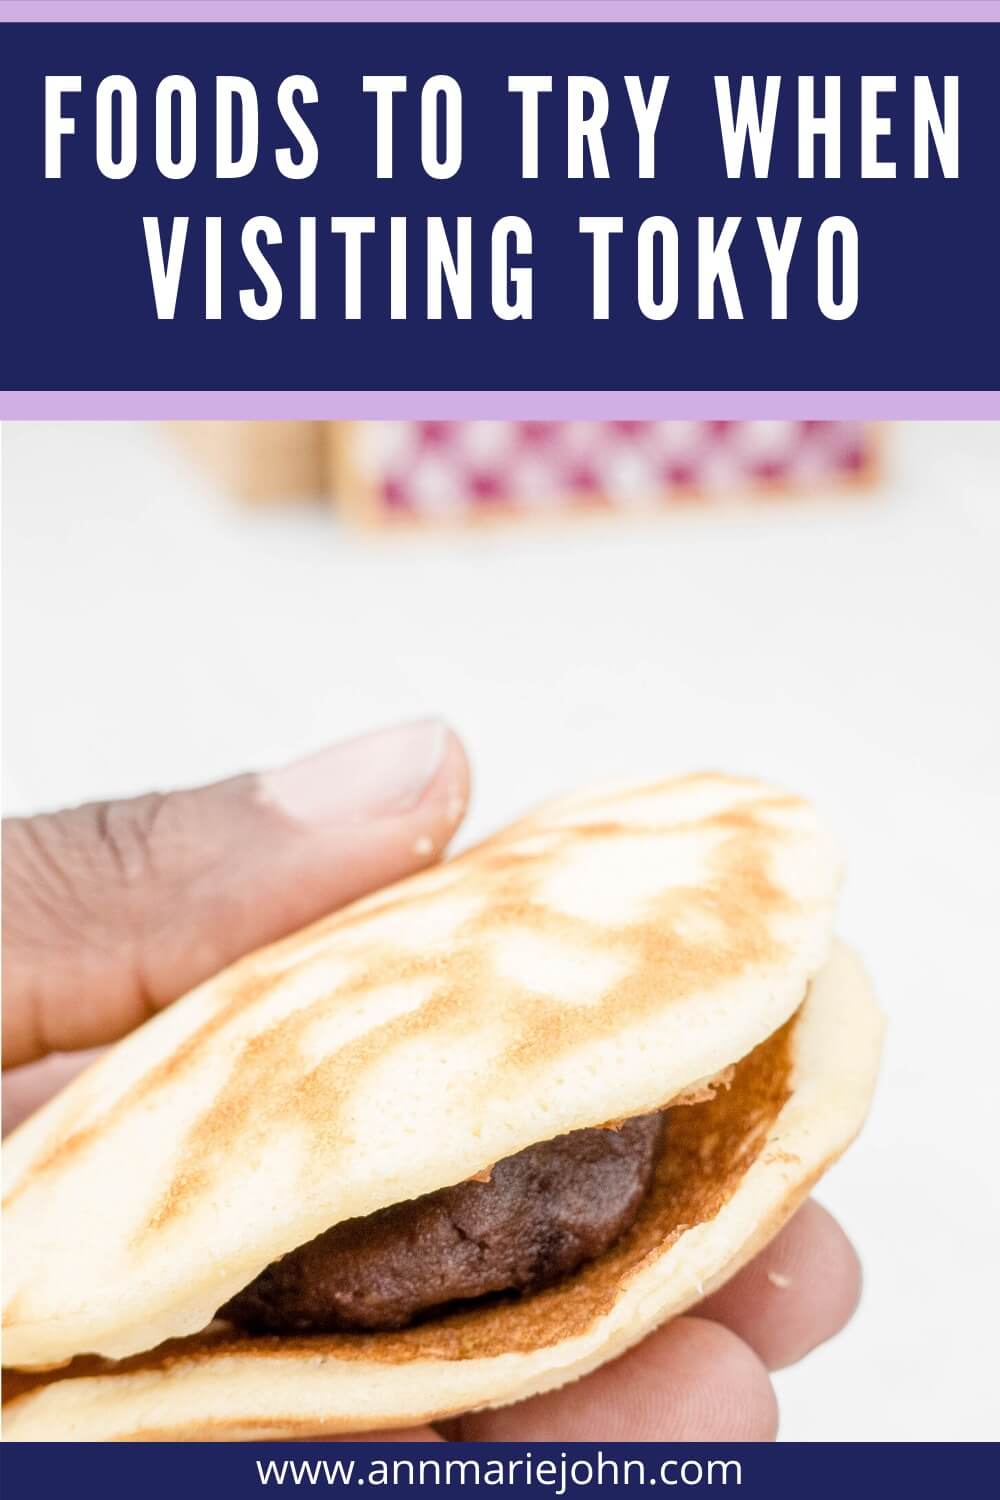 Foods to try when visiting Tokyo